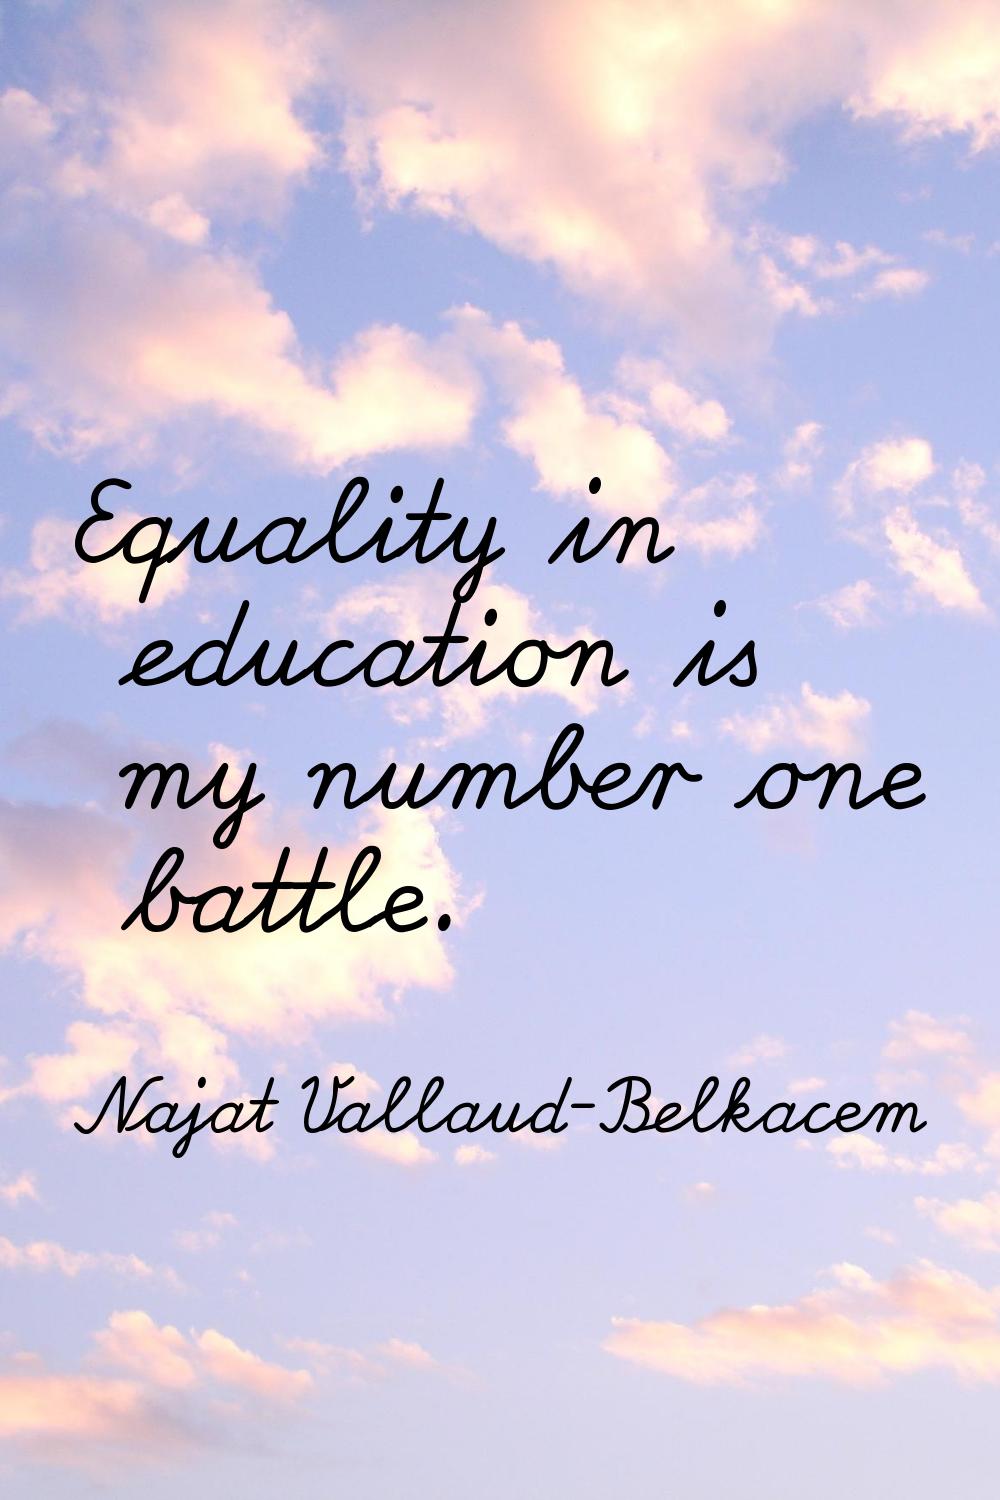 Equality in education is my number one battle.